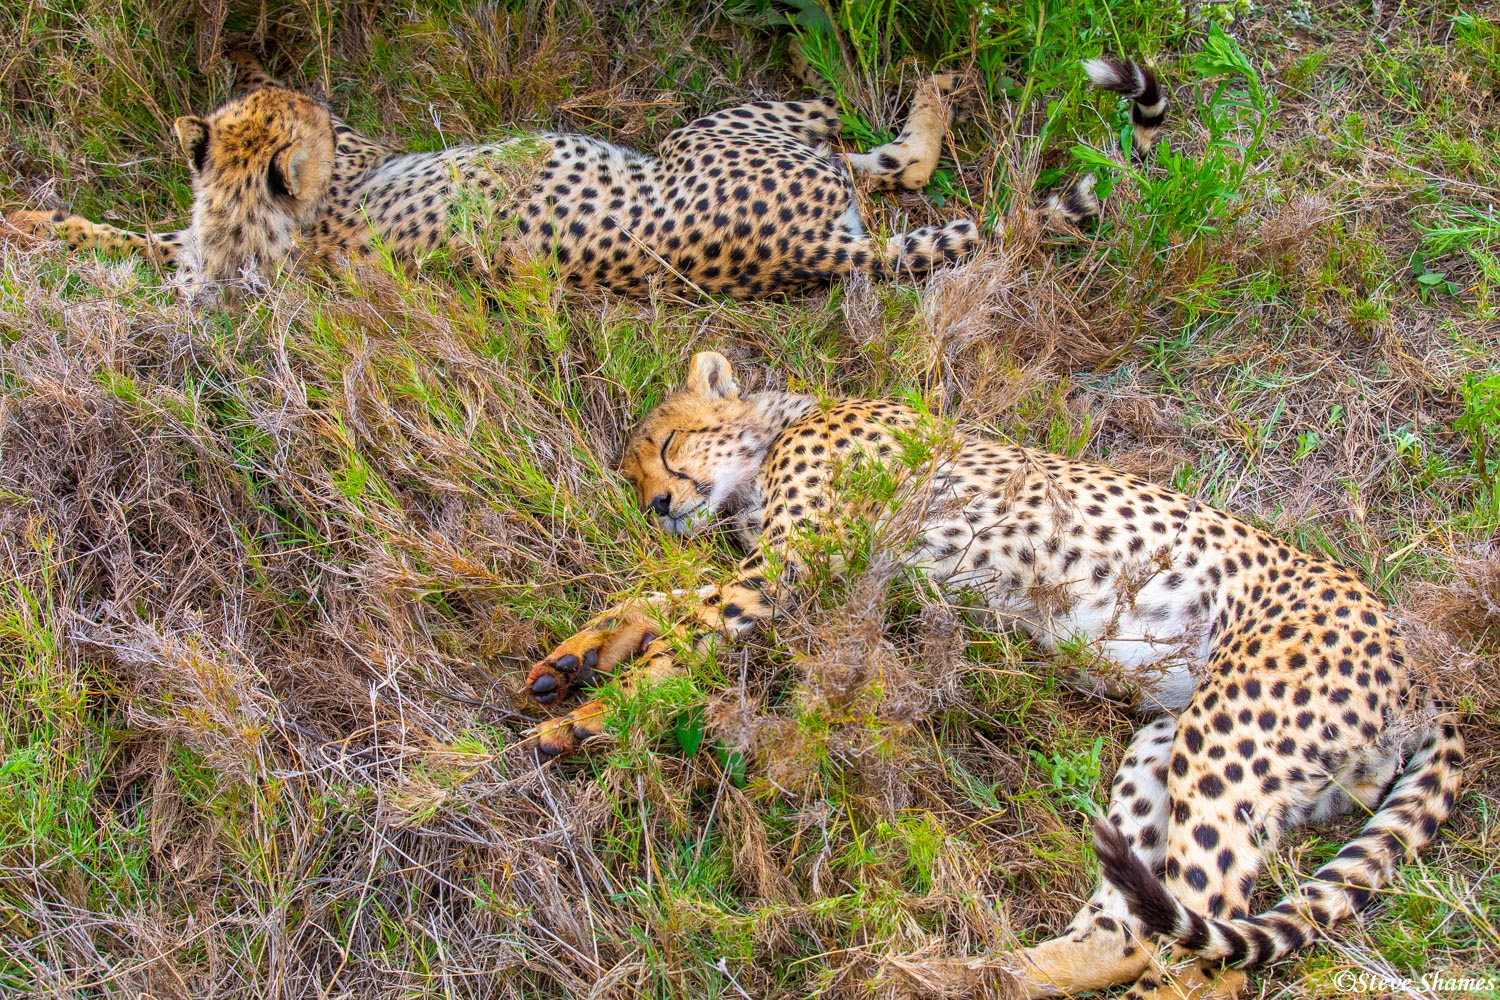 Cheetah cubs sleeping off a full meal, which all cats like to do.